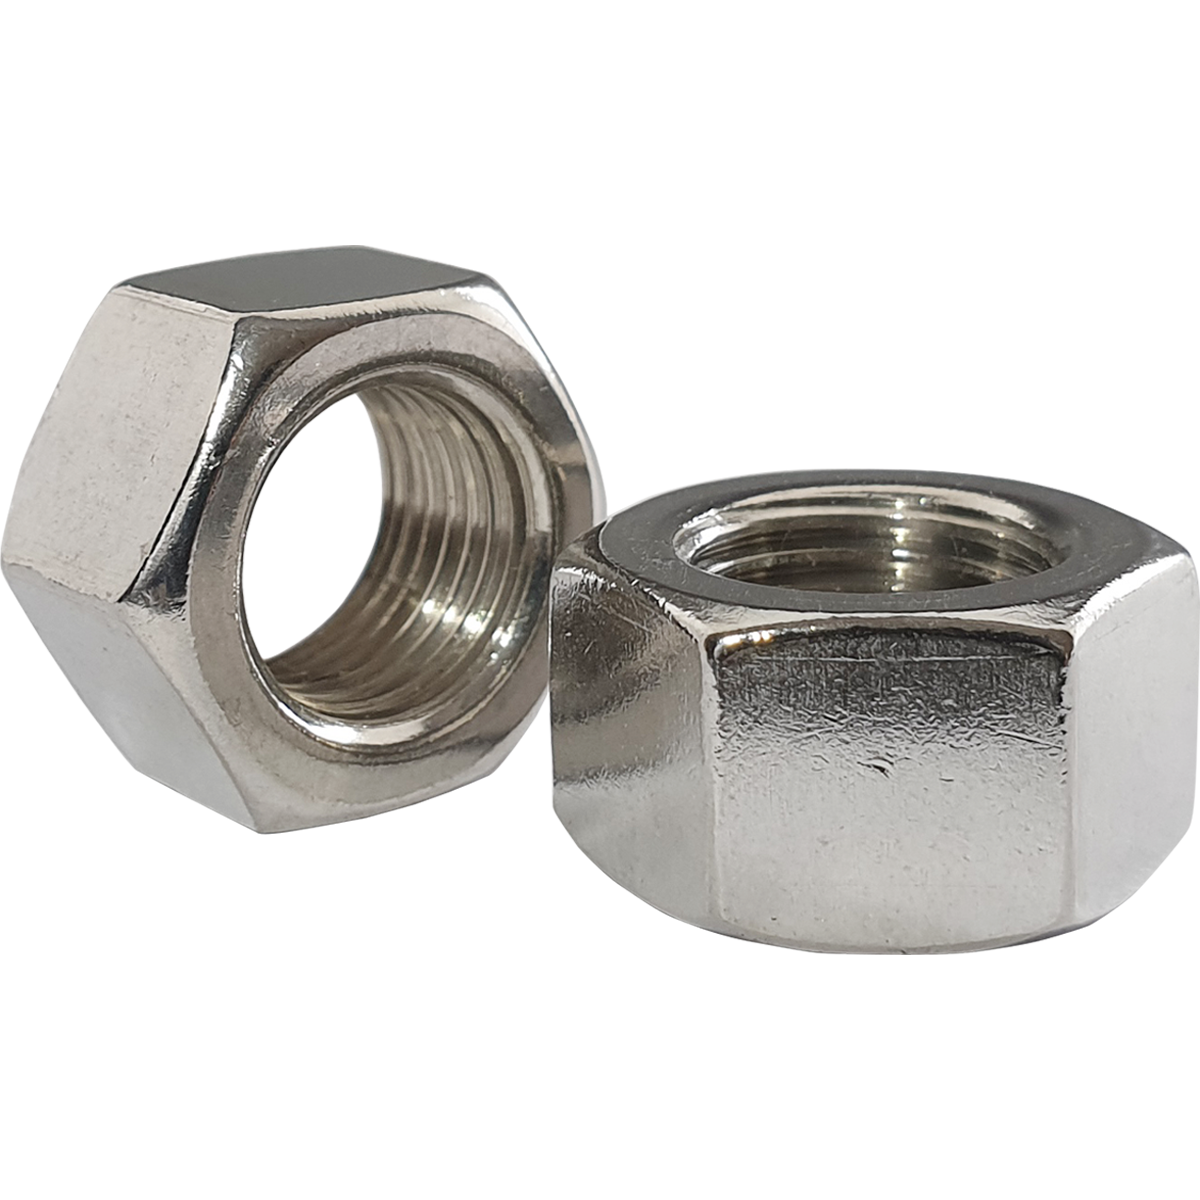 Corrosion-resistant A4 stainless steel hex full nuts, also known as hex nuts or hexagon nuts, at great prices with Fusion Fixings